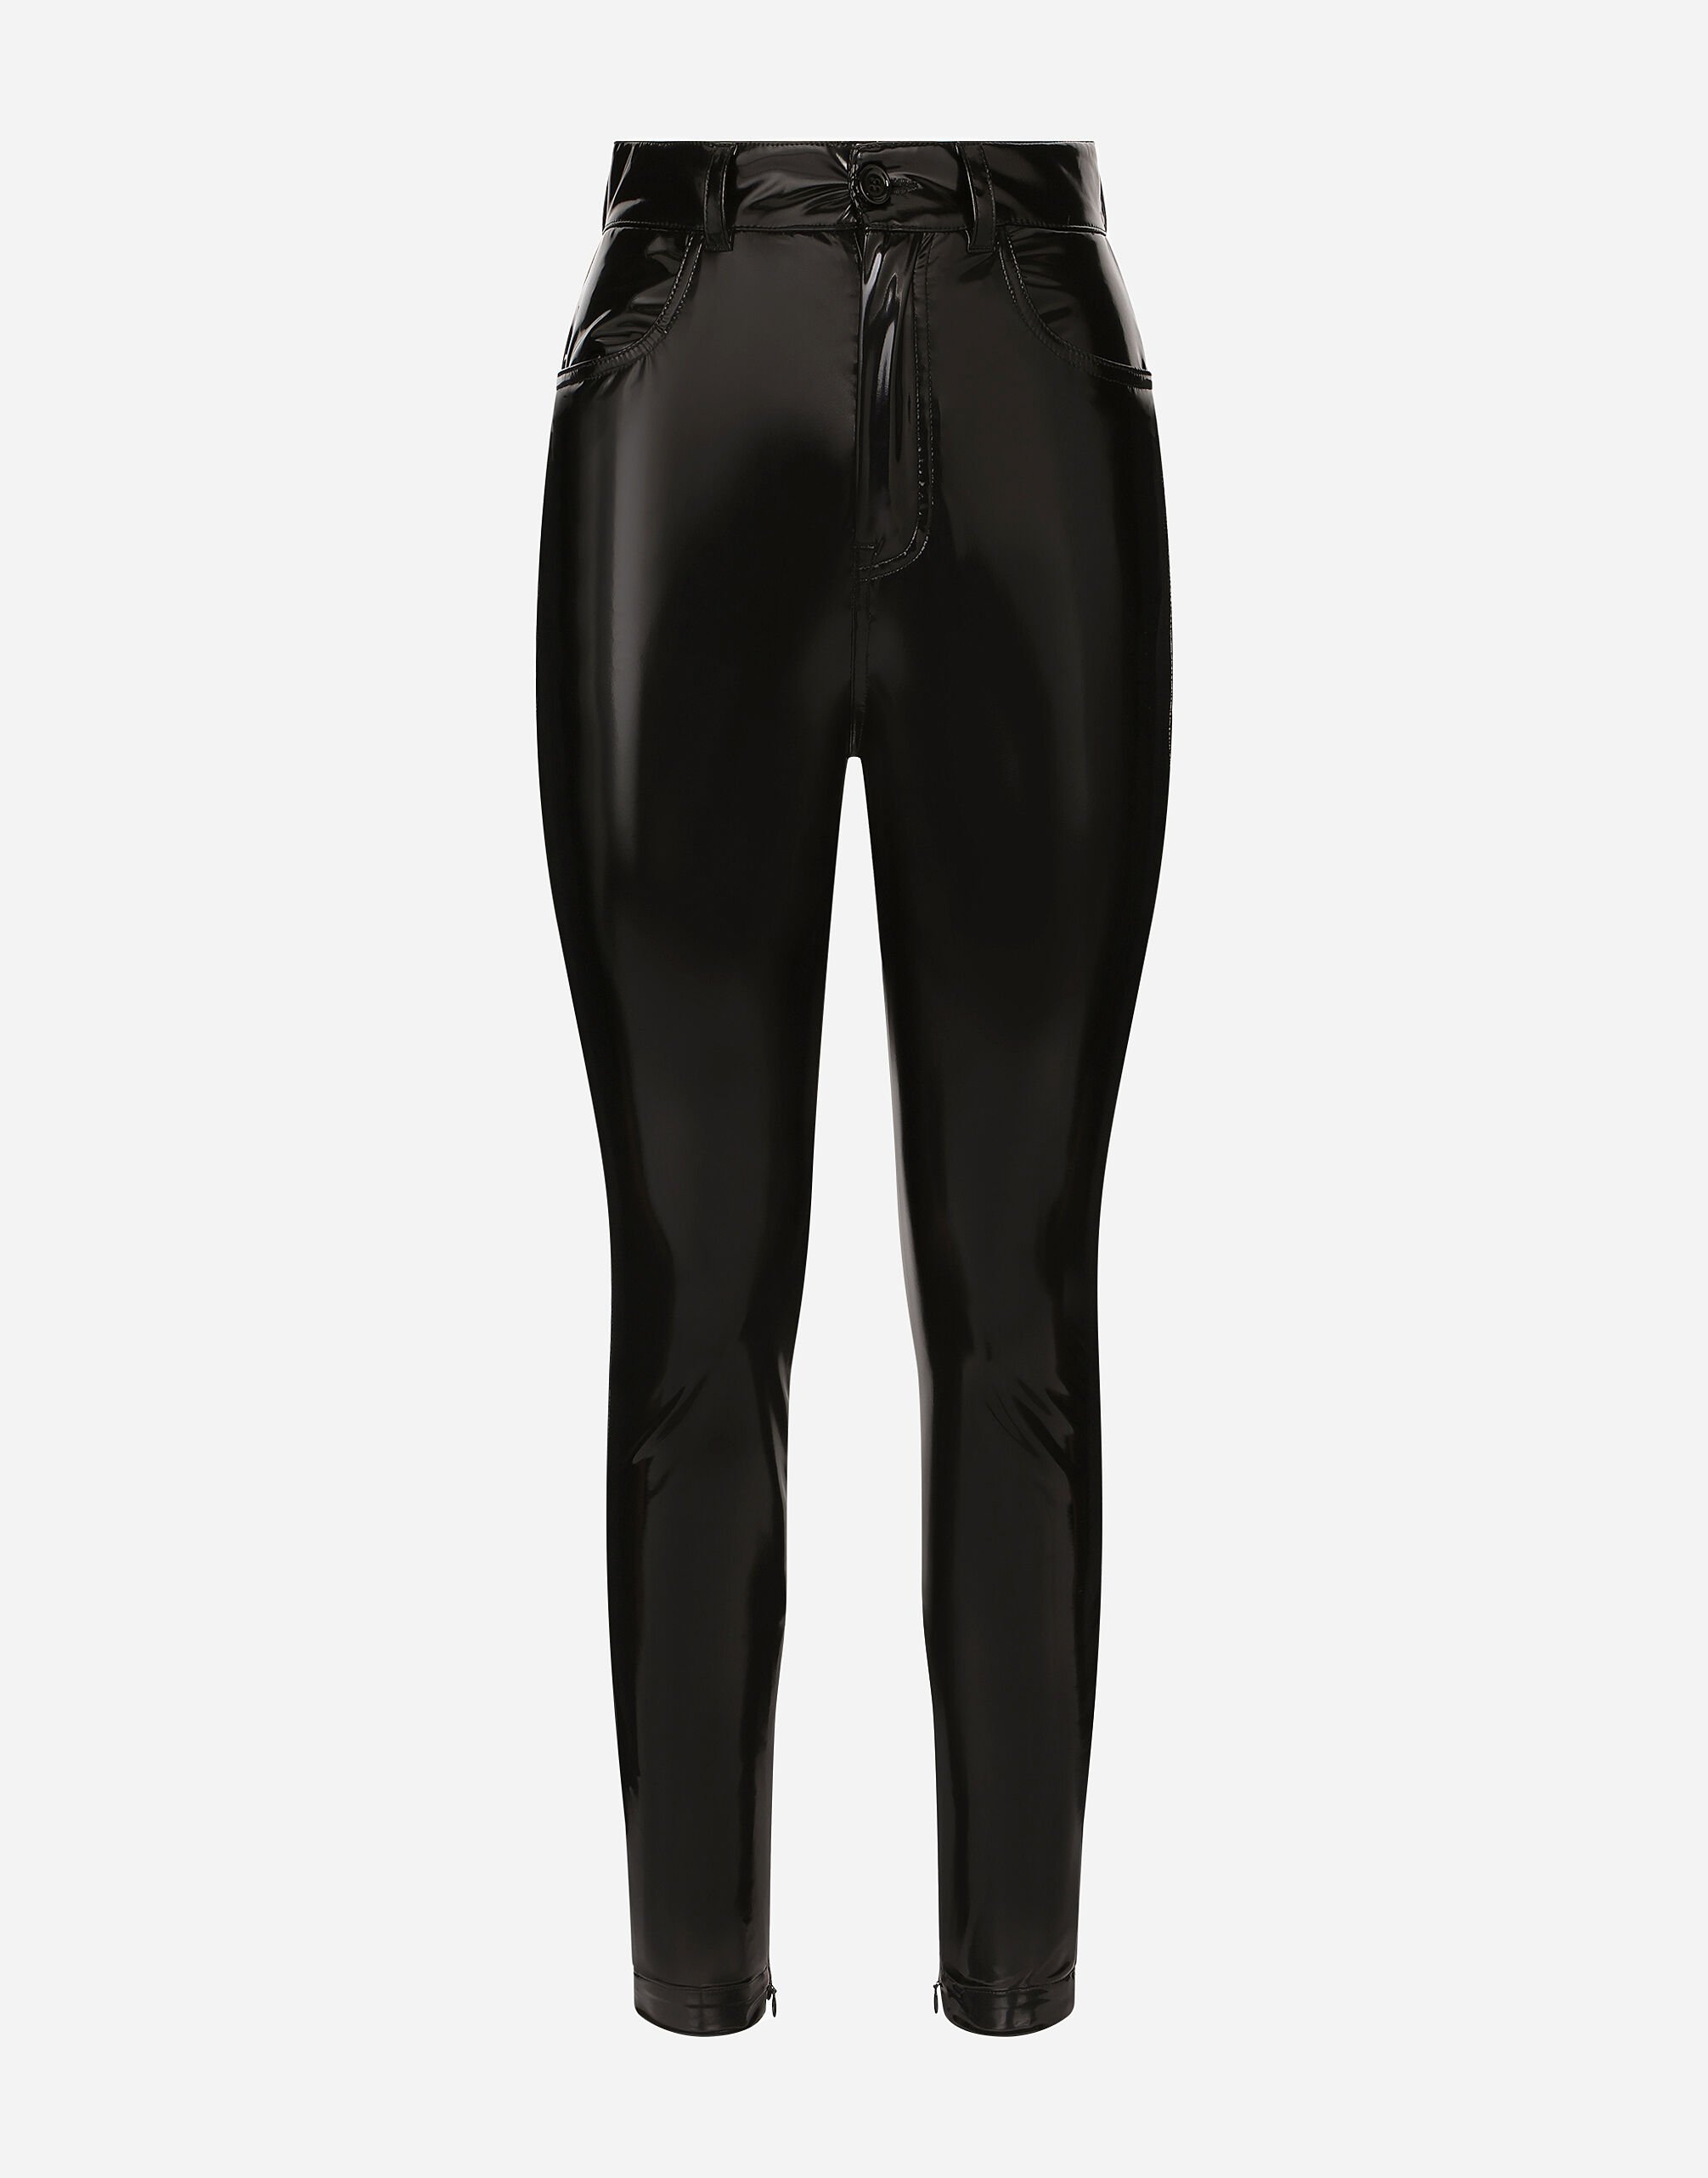 Dolce & Gabbana High-waisted coated jersey pants Black F26R2TOUADW